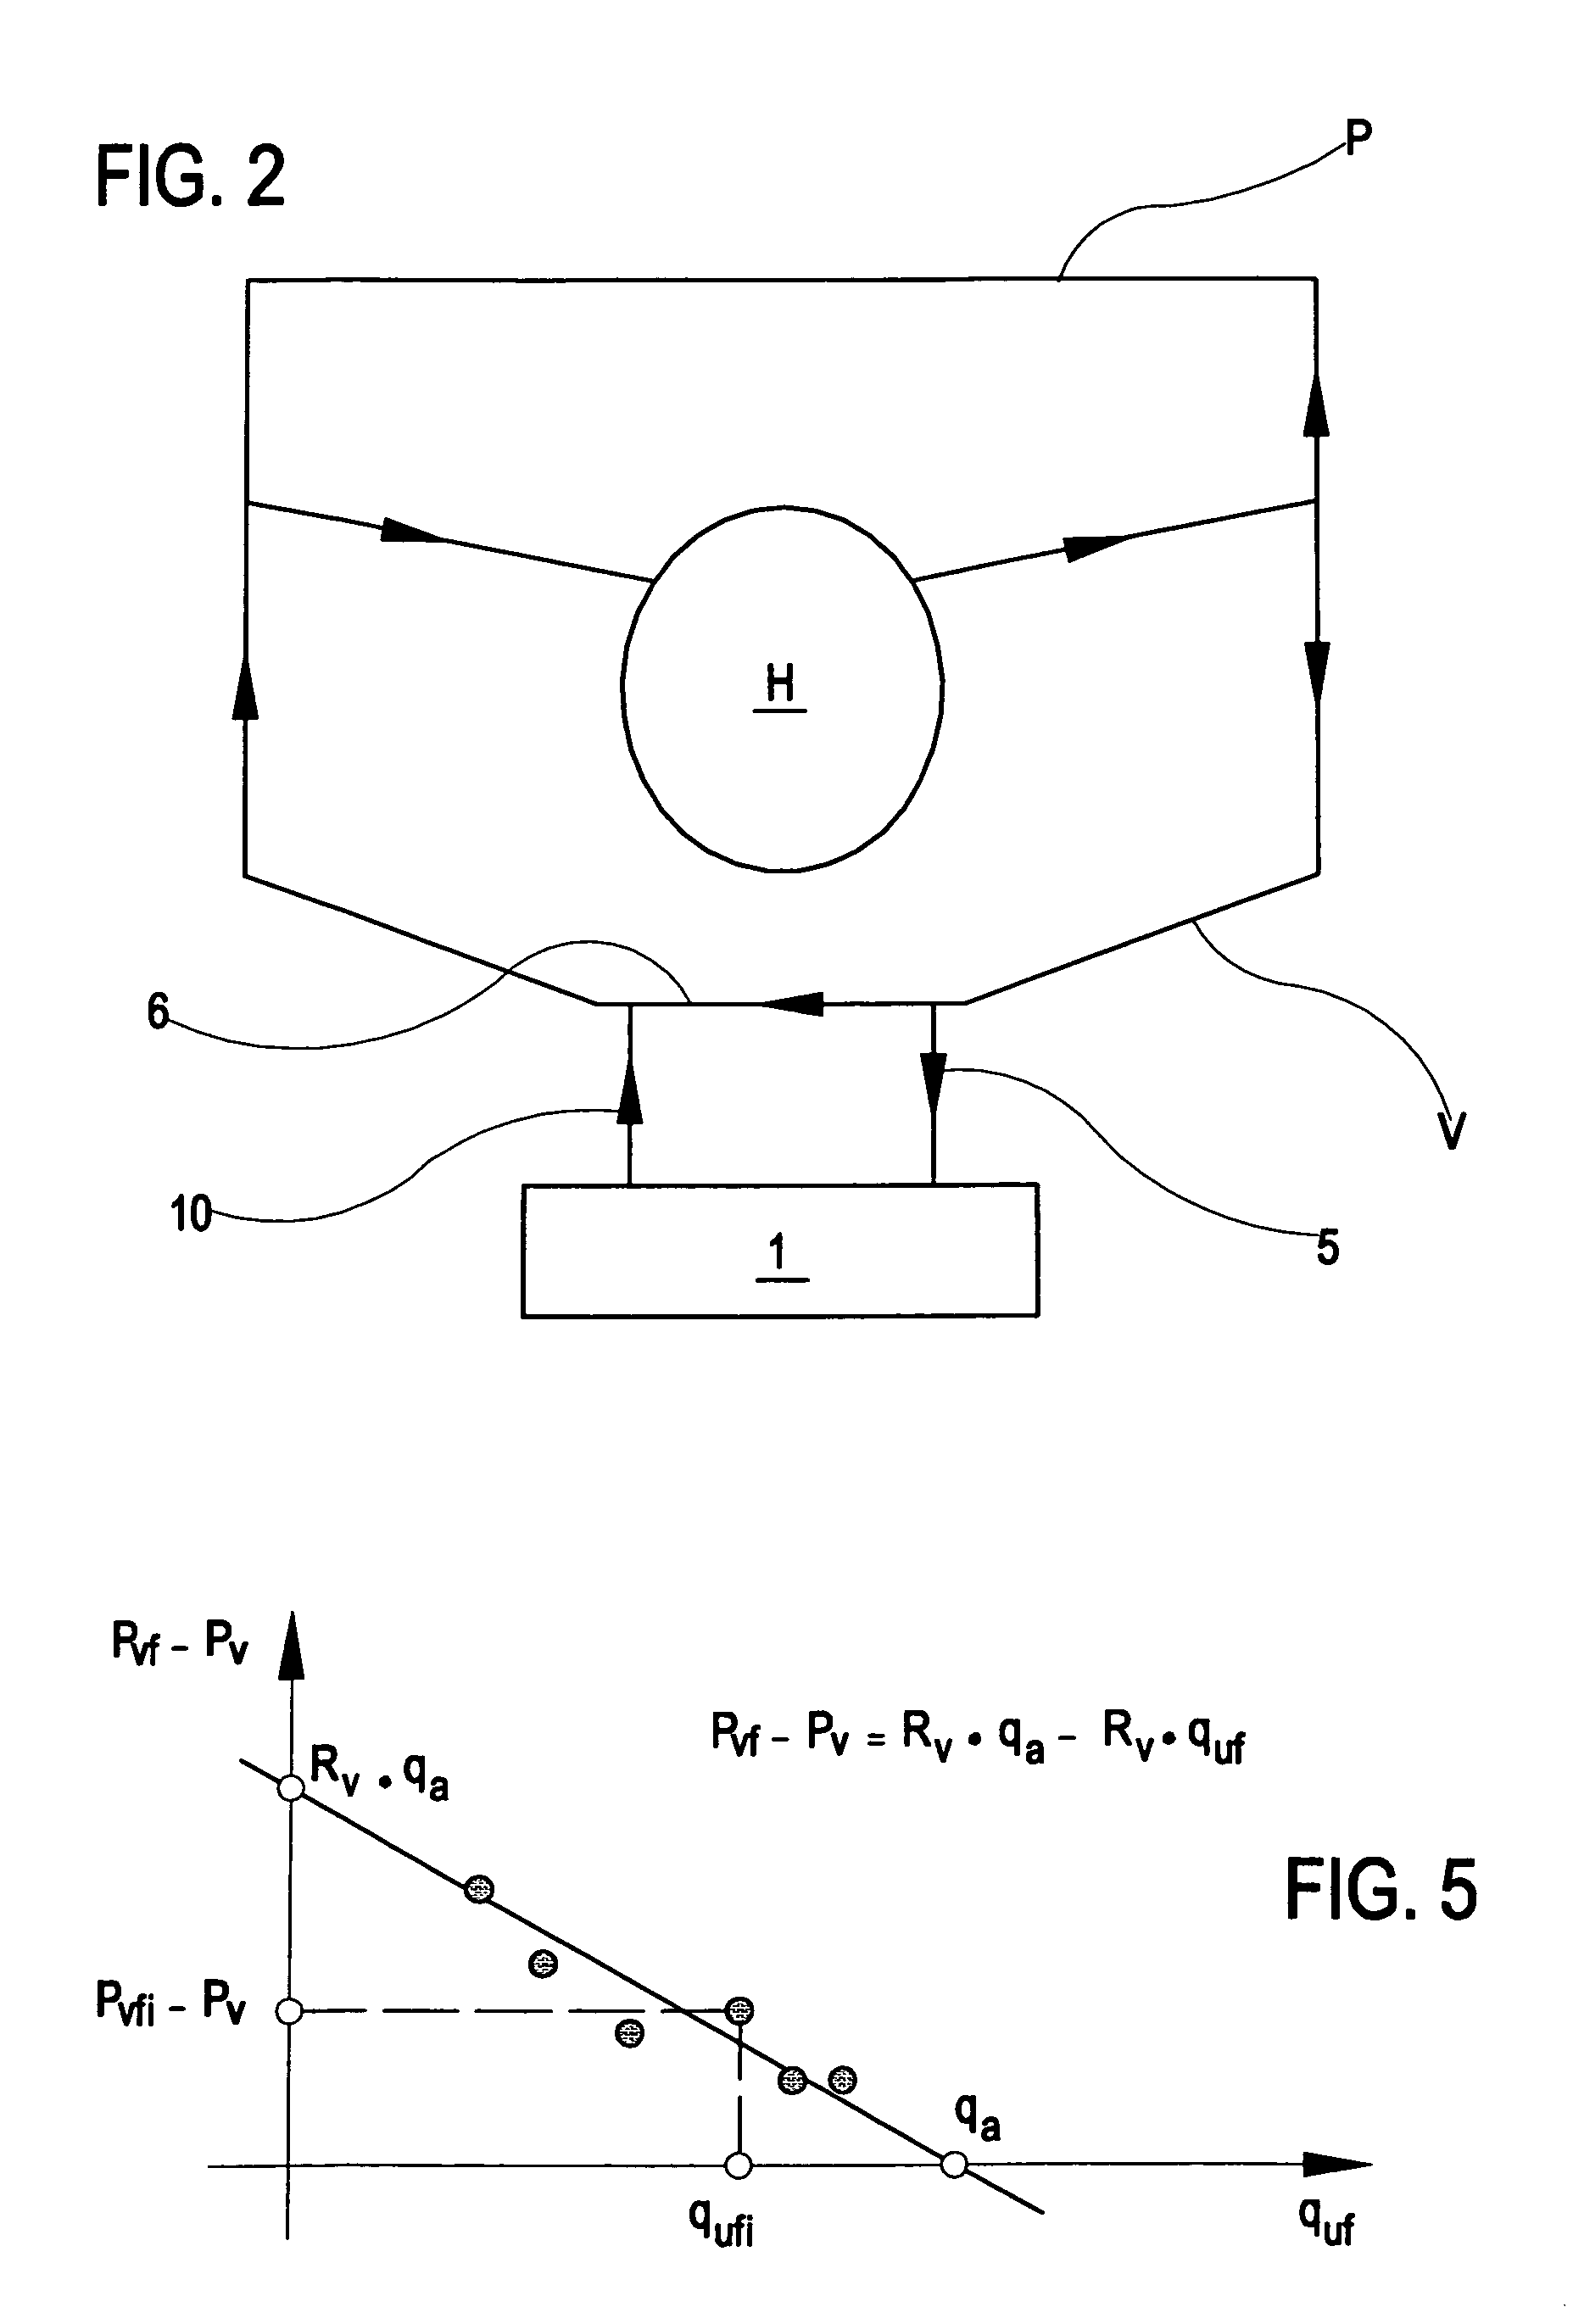 Apparatus and method of monitoring a vascular access of a patient subjected to an extracorporeal blood treatment